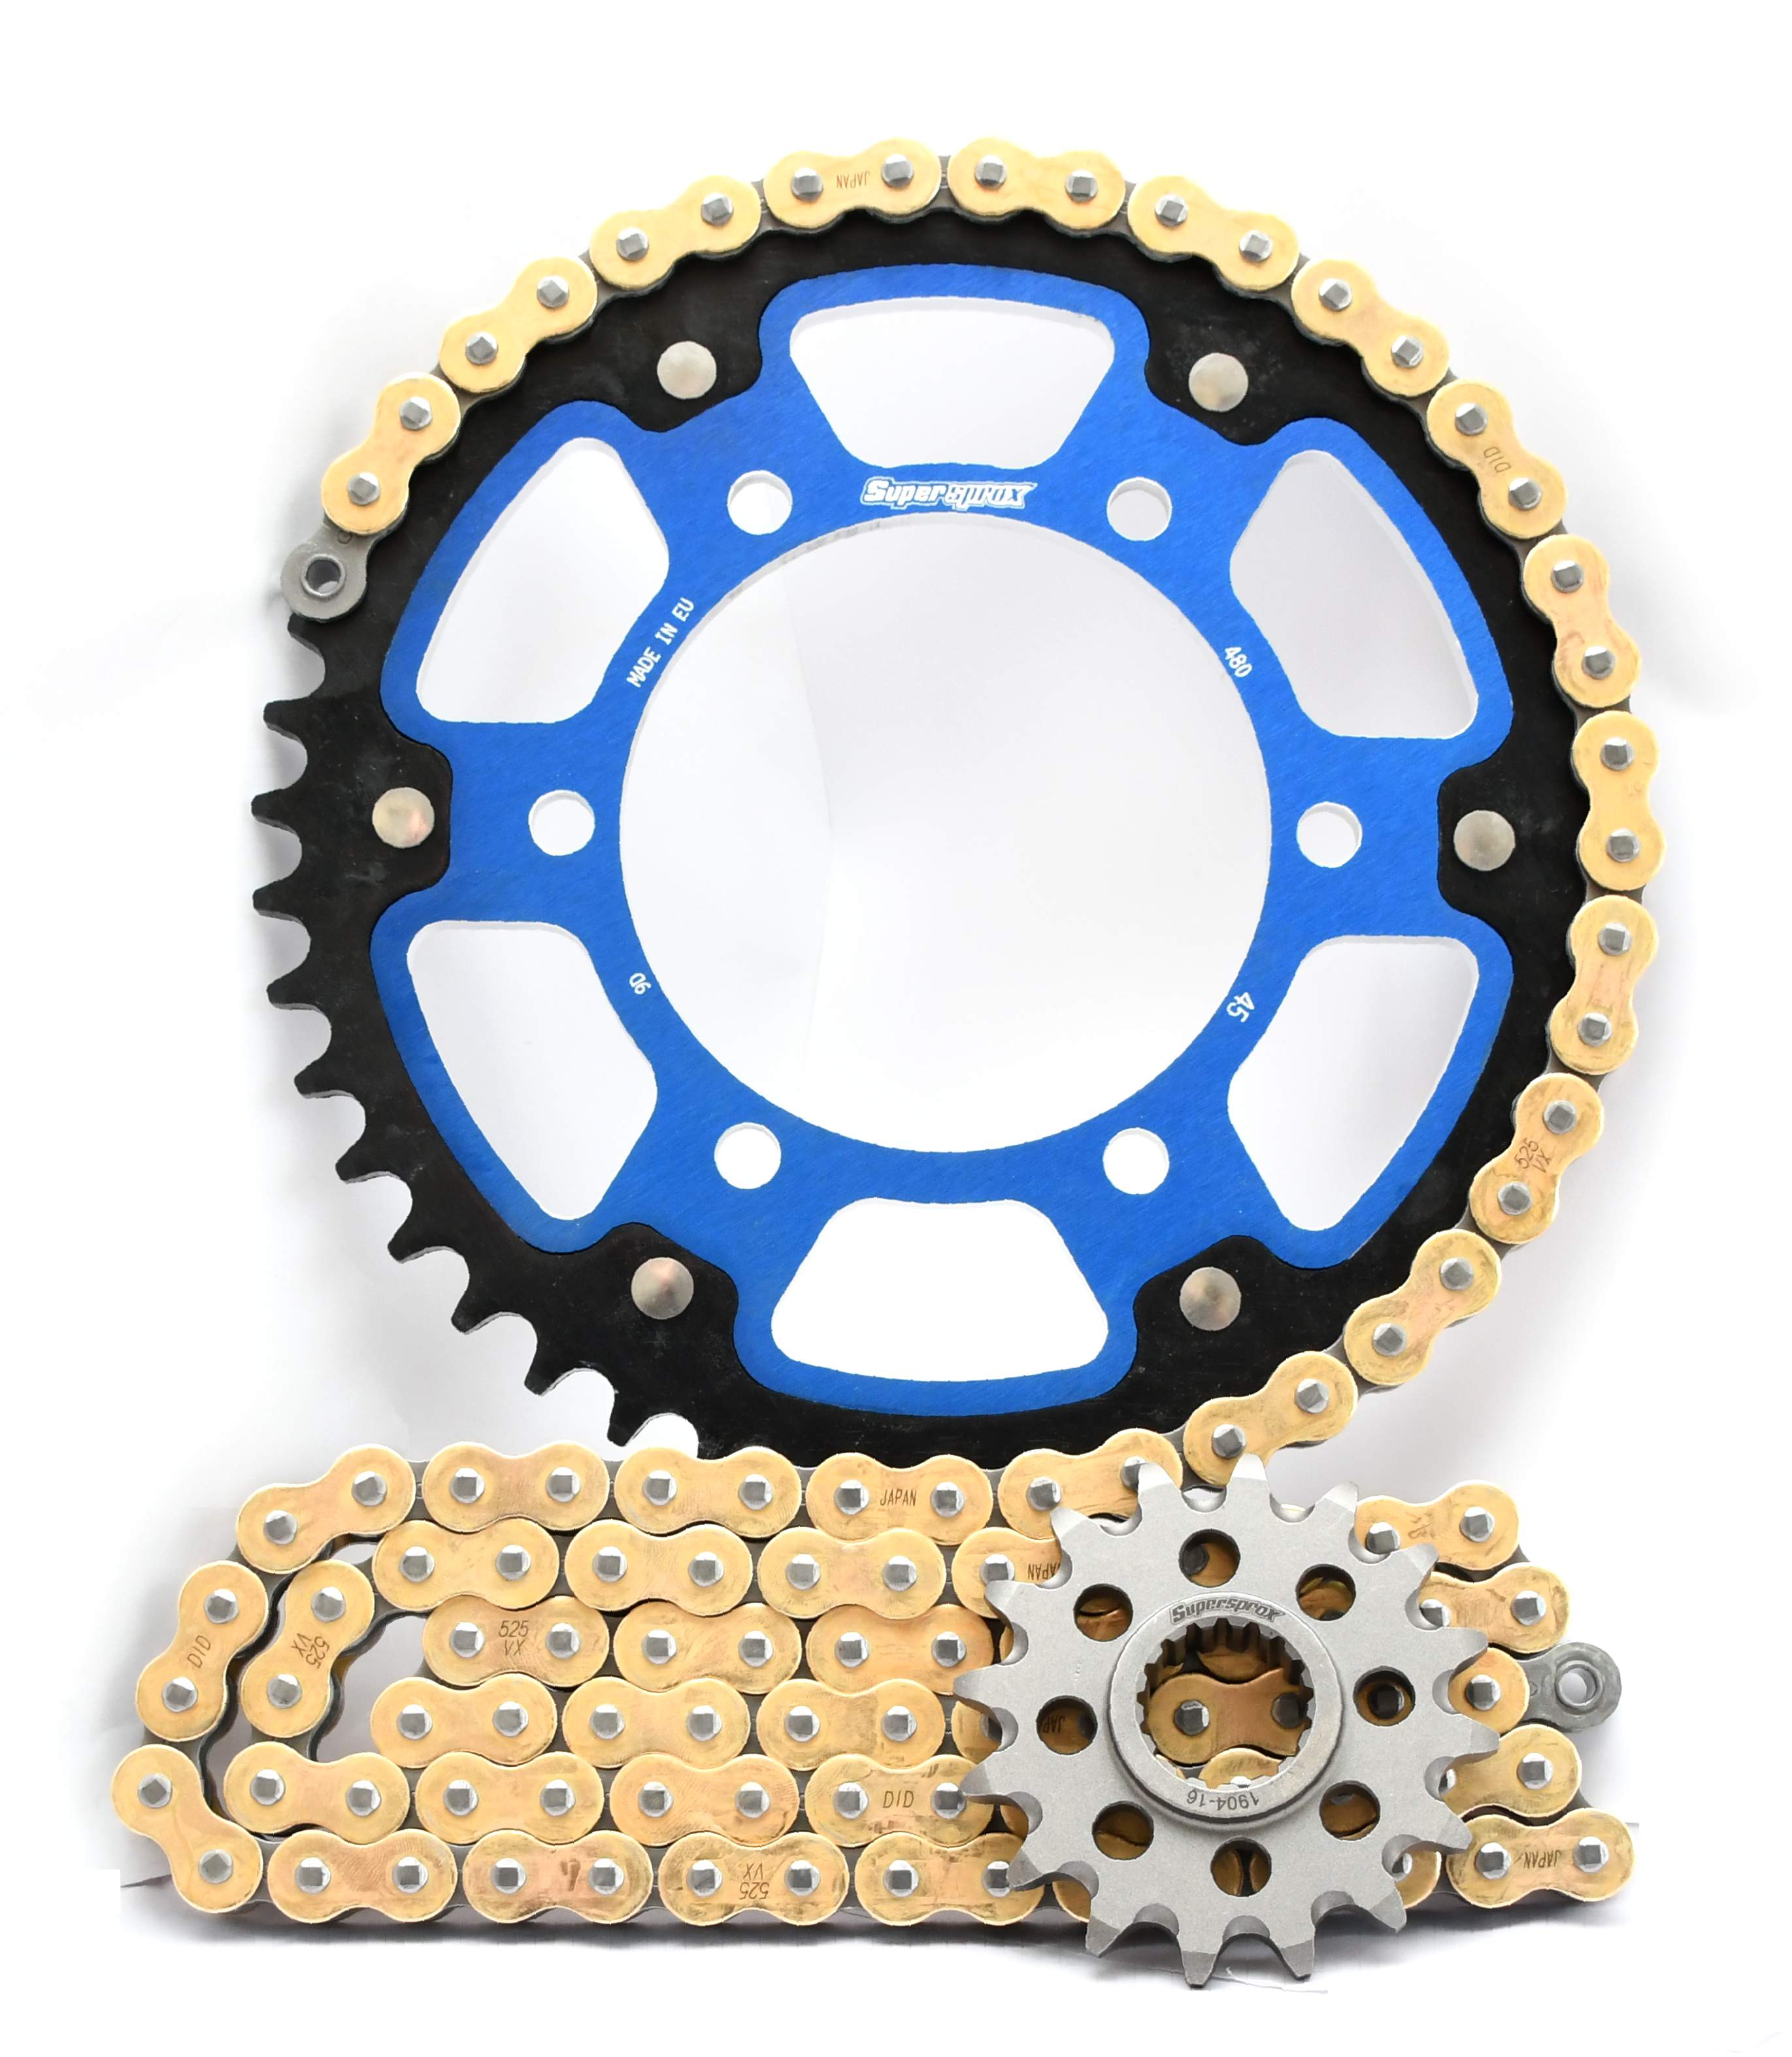 Supersprox Chain & Sprocket Kit for Yamaha YZF R1 1998-2003 - Standard Gearing